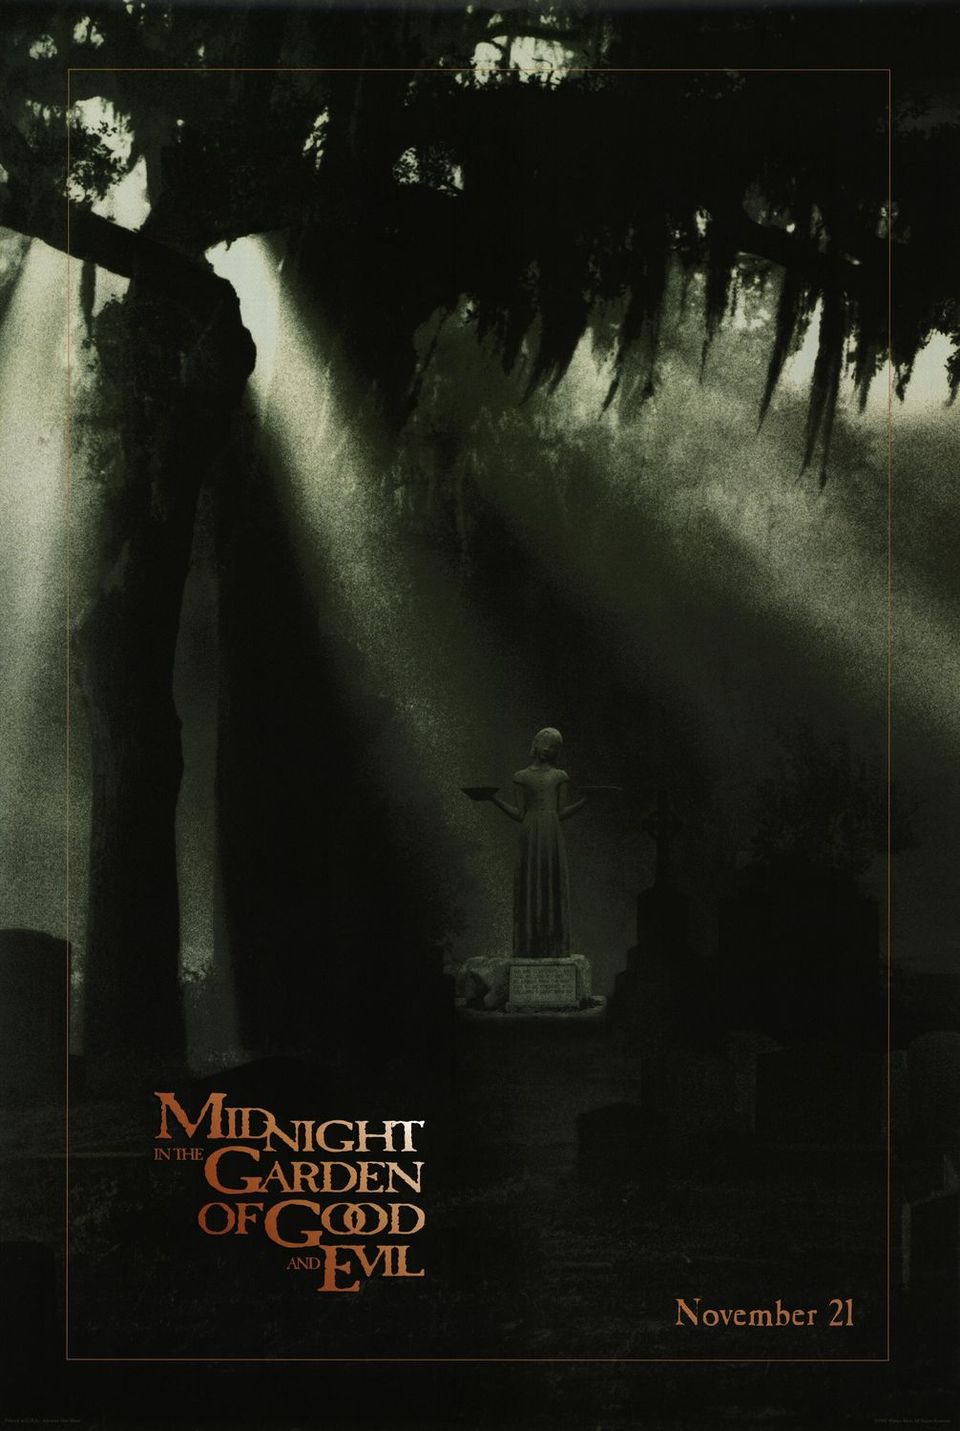 Poster of Midnight in the Garden of Good and Evil - EEUU